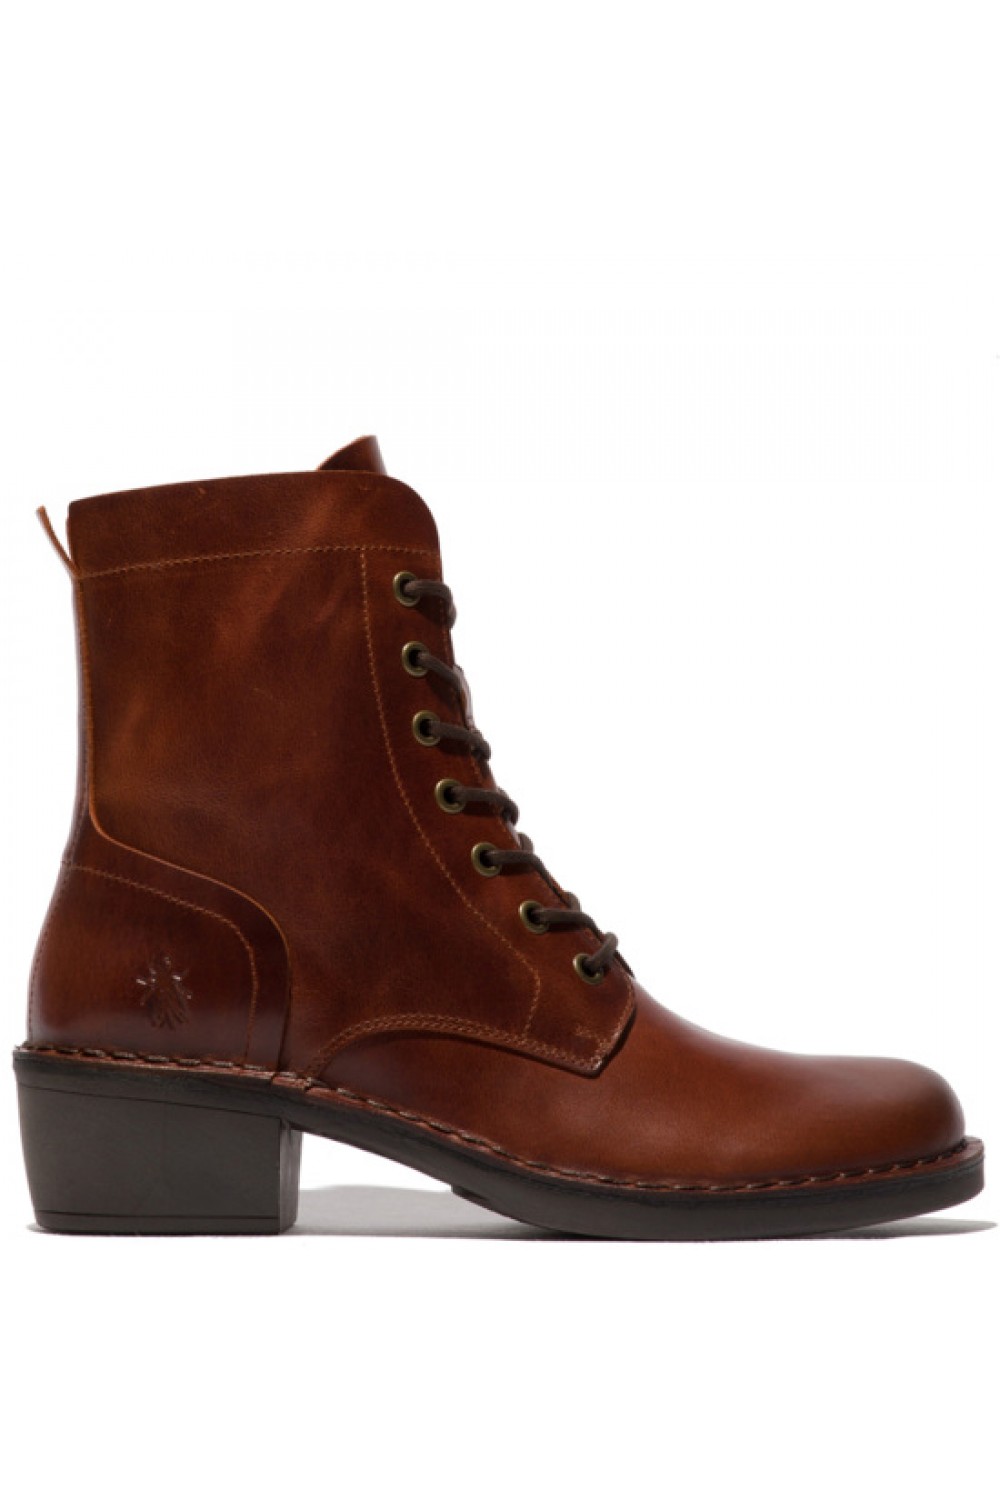 FLY LONDON MiluO44 Leather Lace Up Ankle Boot Brick